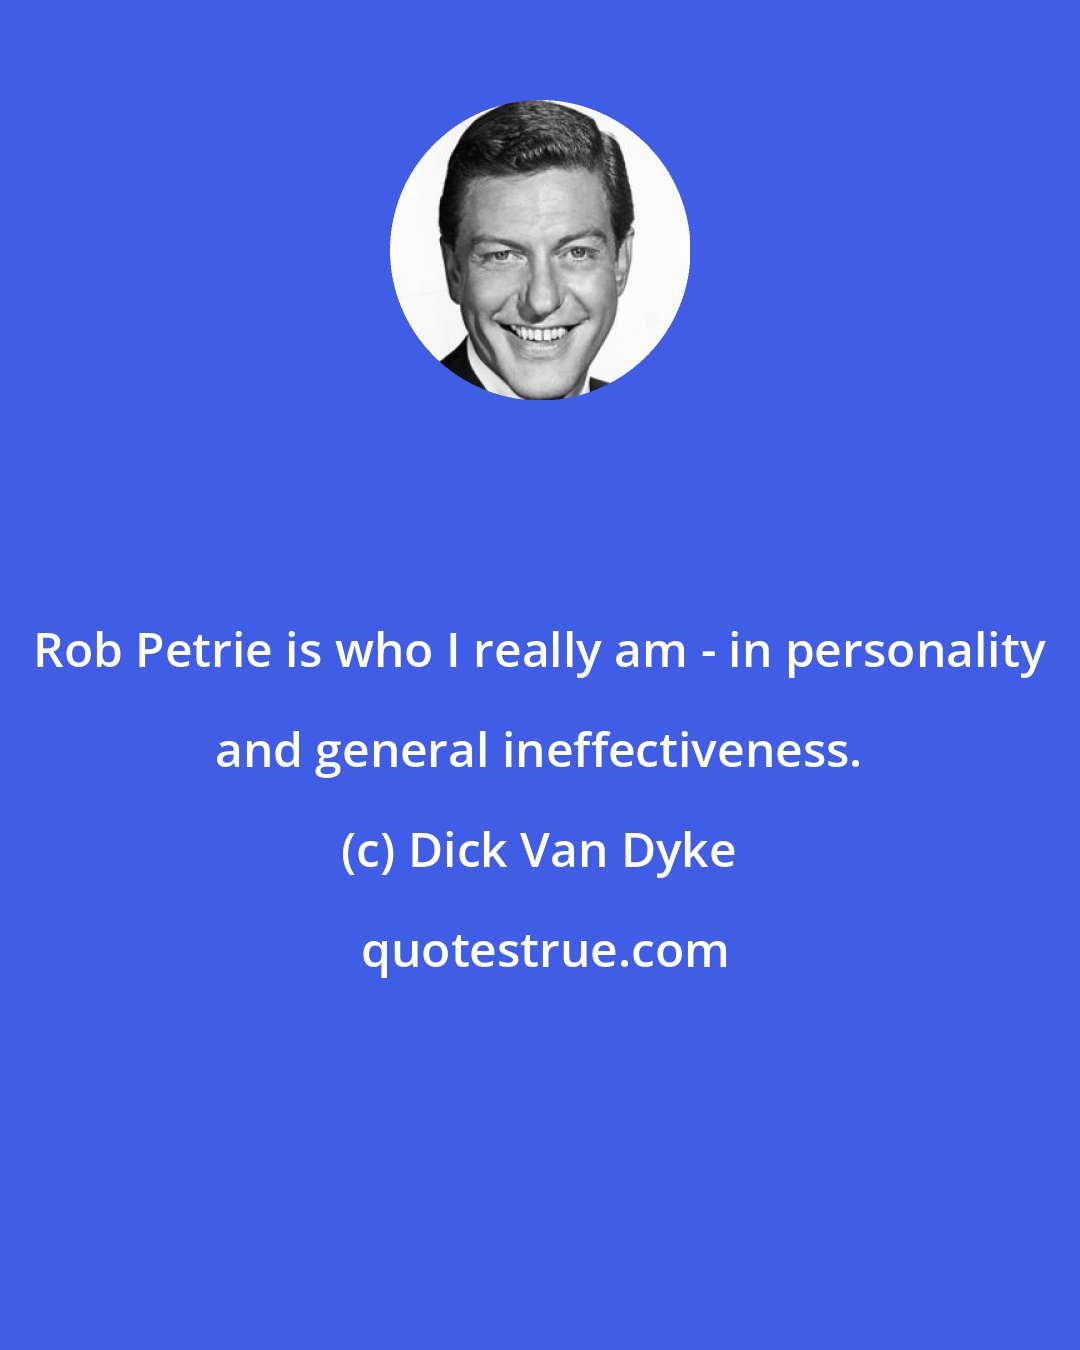 Dick Van Dyke: Rob Petrie is who I really am - in personality and general ineffectiveness.